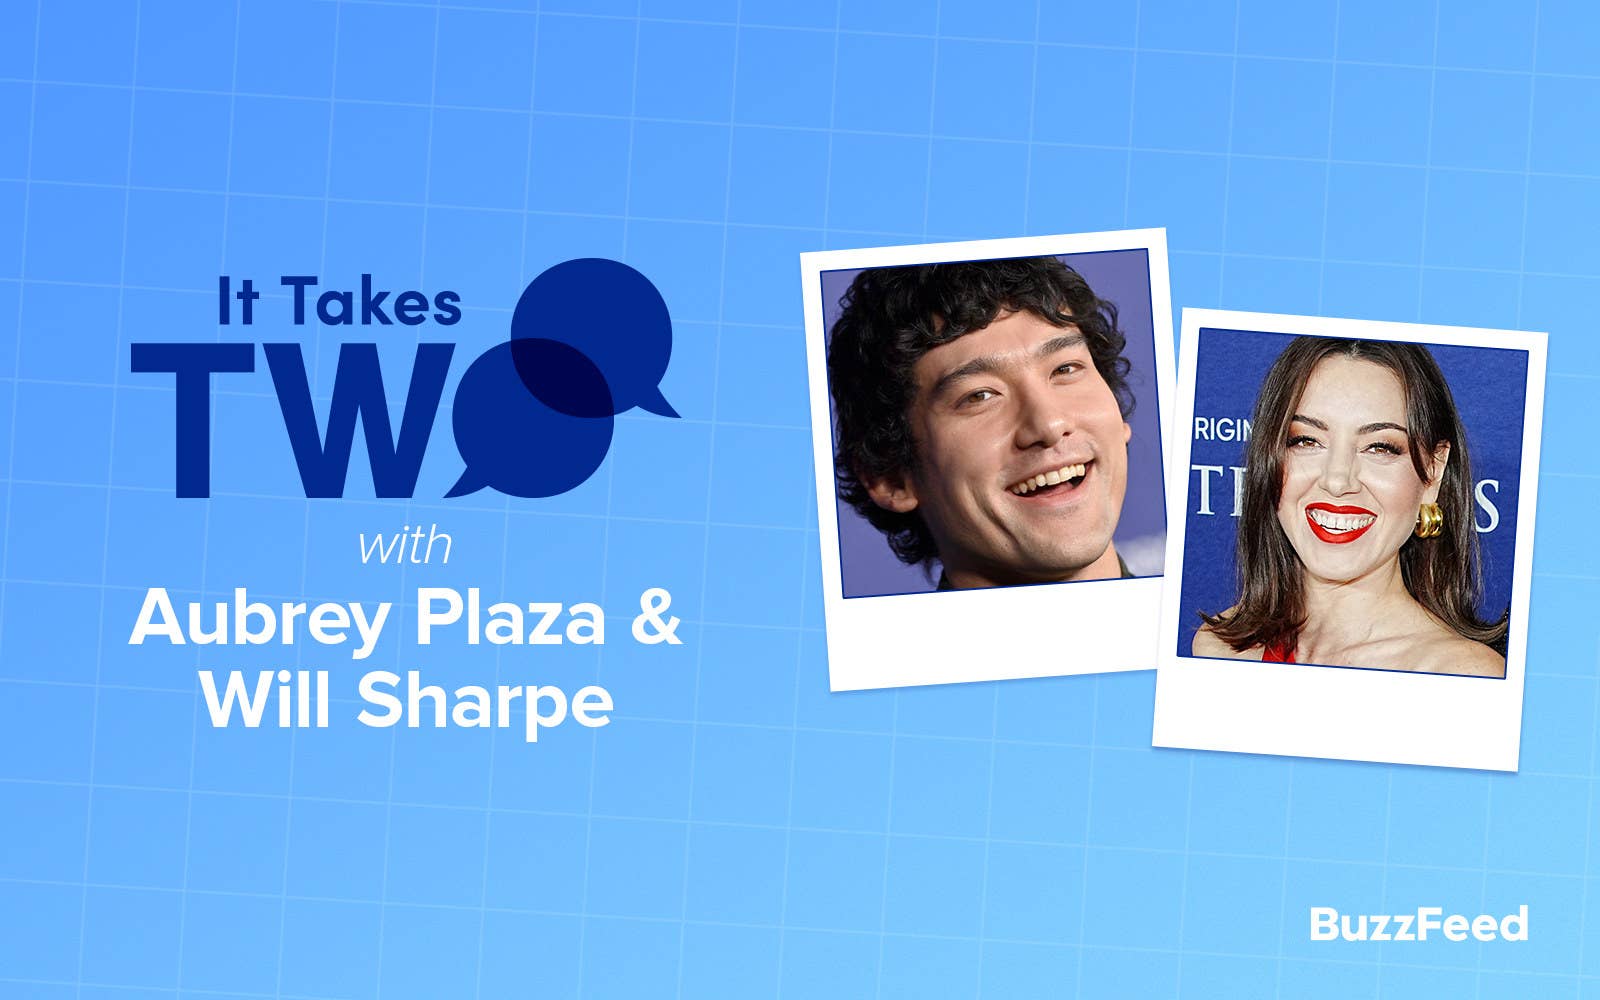 Header that says &quot;It Takes Two with Aubrey Plaza &amp; Will Sharpe&quot;